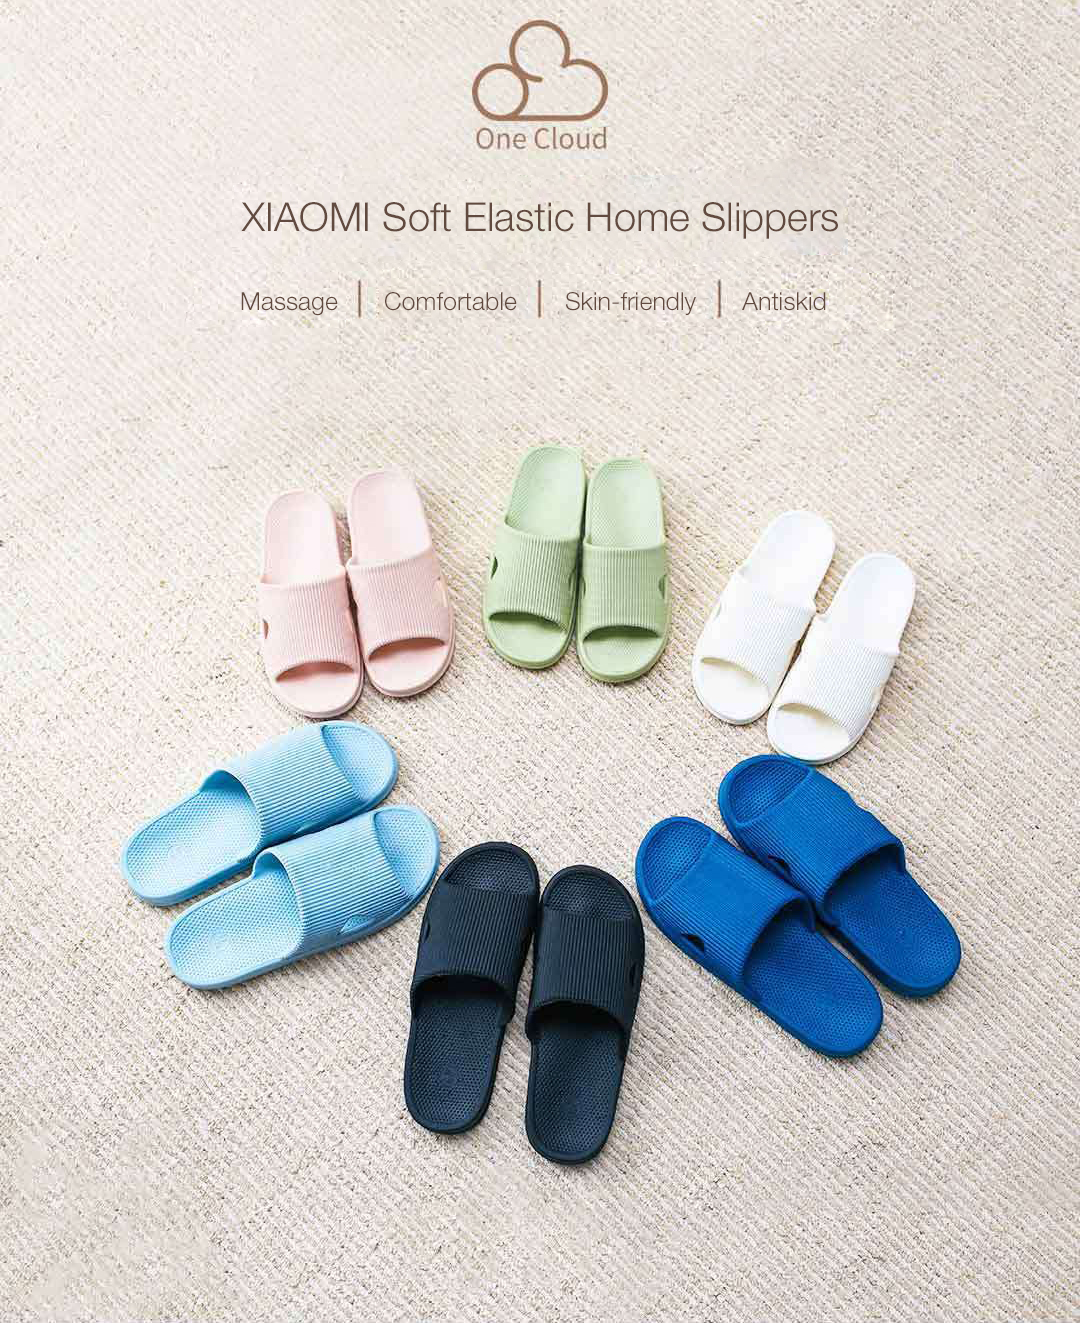 XIAOMI-One-Cloud-Antiskid-Safe-Massage-Antibacterial-Quick-Dry-Soft-Elastic-Slippers-For-Home-1292838